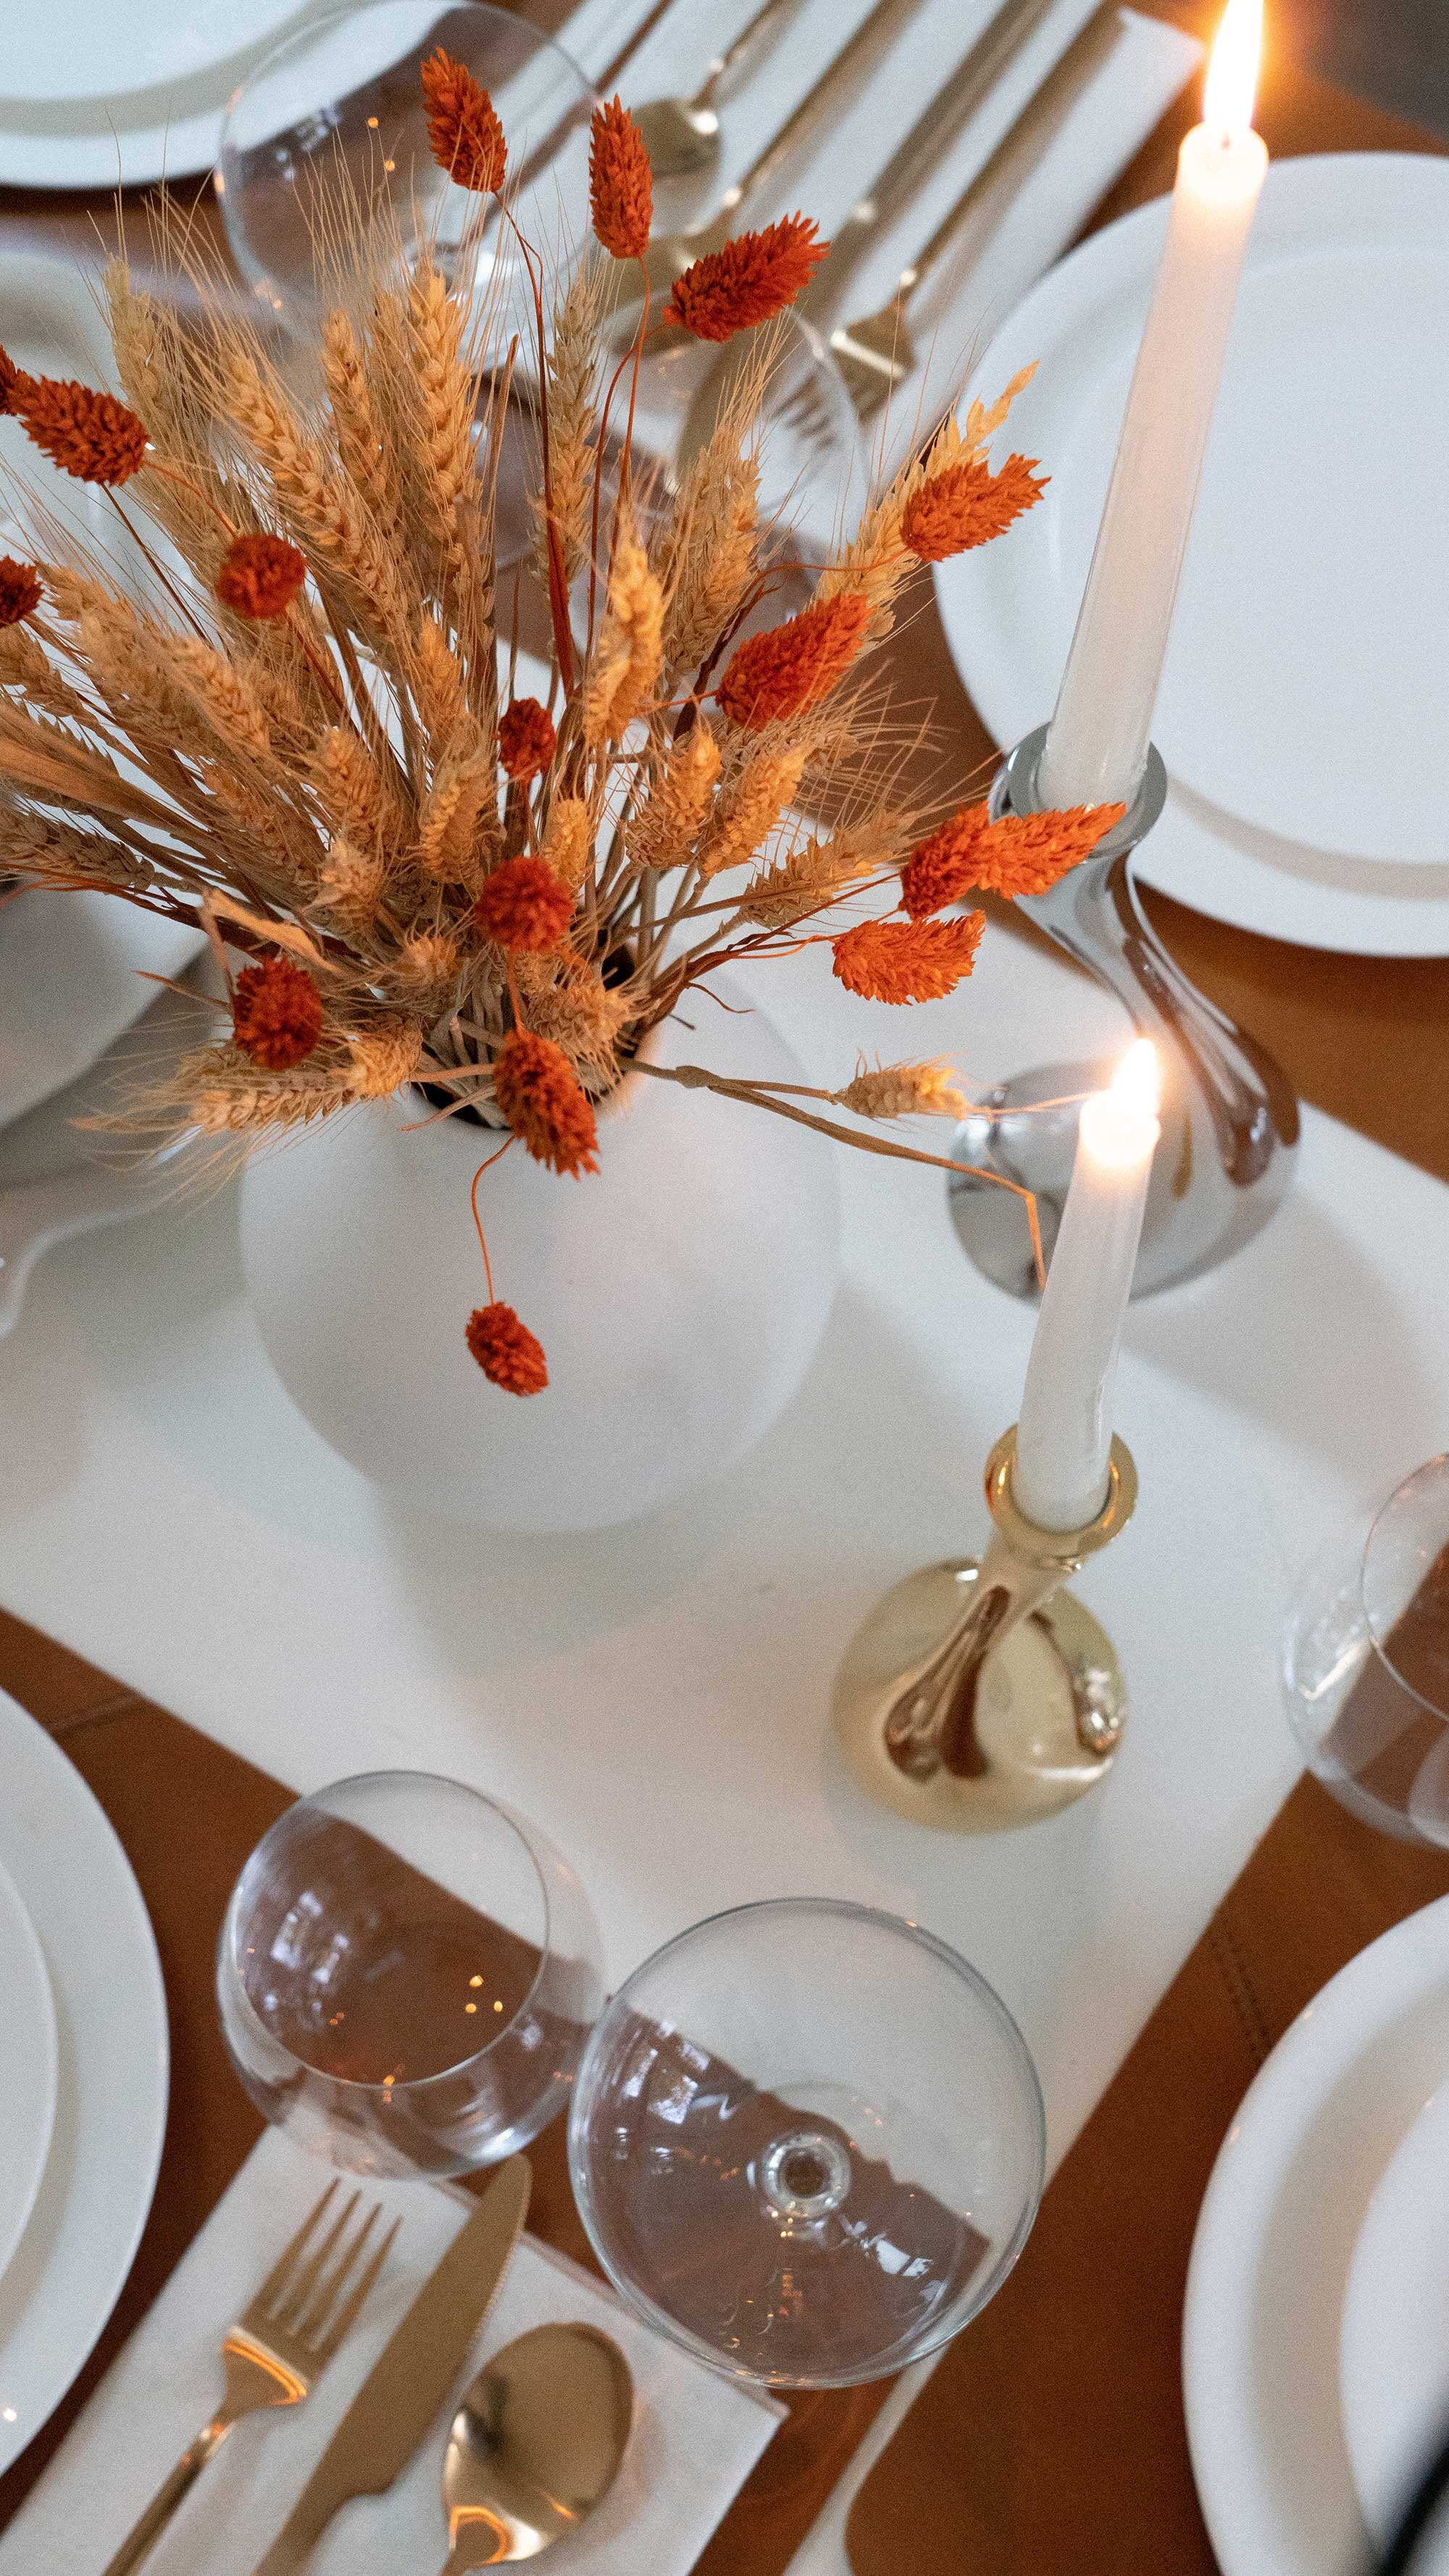 Thanksgiving table settings elegant gold. Sarah Butler of @sarahchristine Thanksgiving table settings featuring Georg Jensen Cobra Candleholder Set, tan leather placemats, and modern gold plated flatware with rustic dried flowers 10.jpg